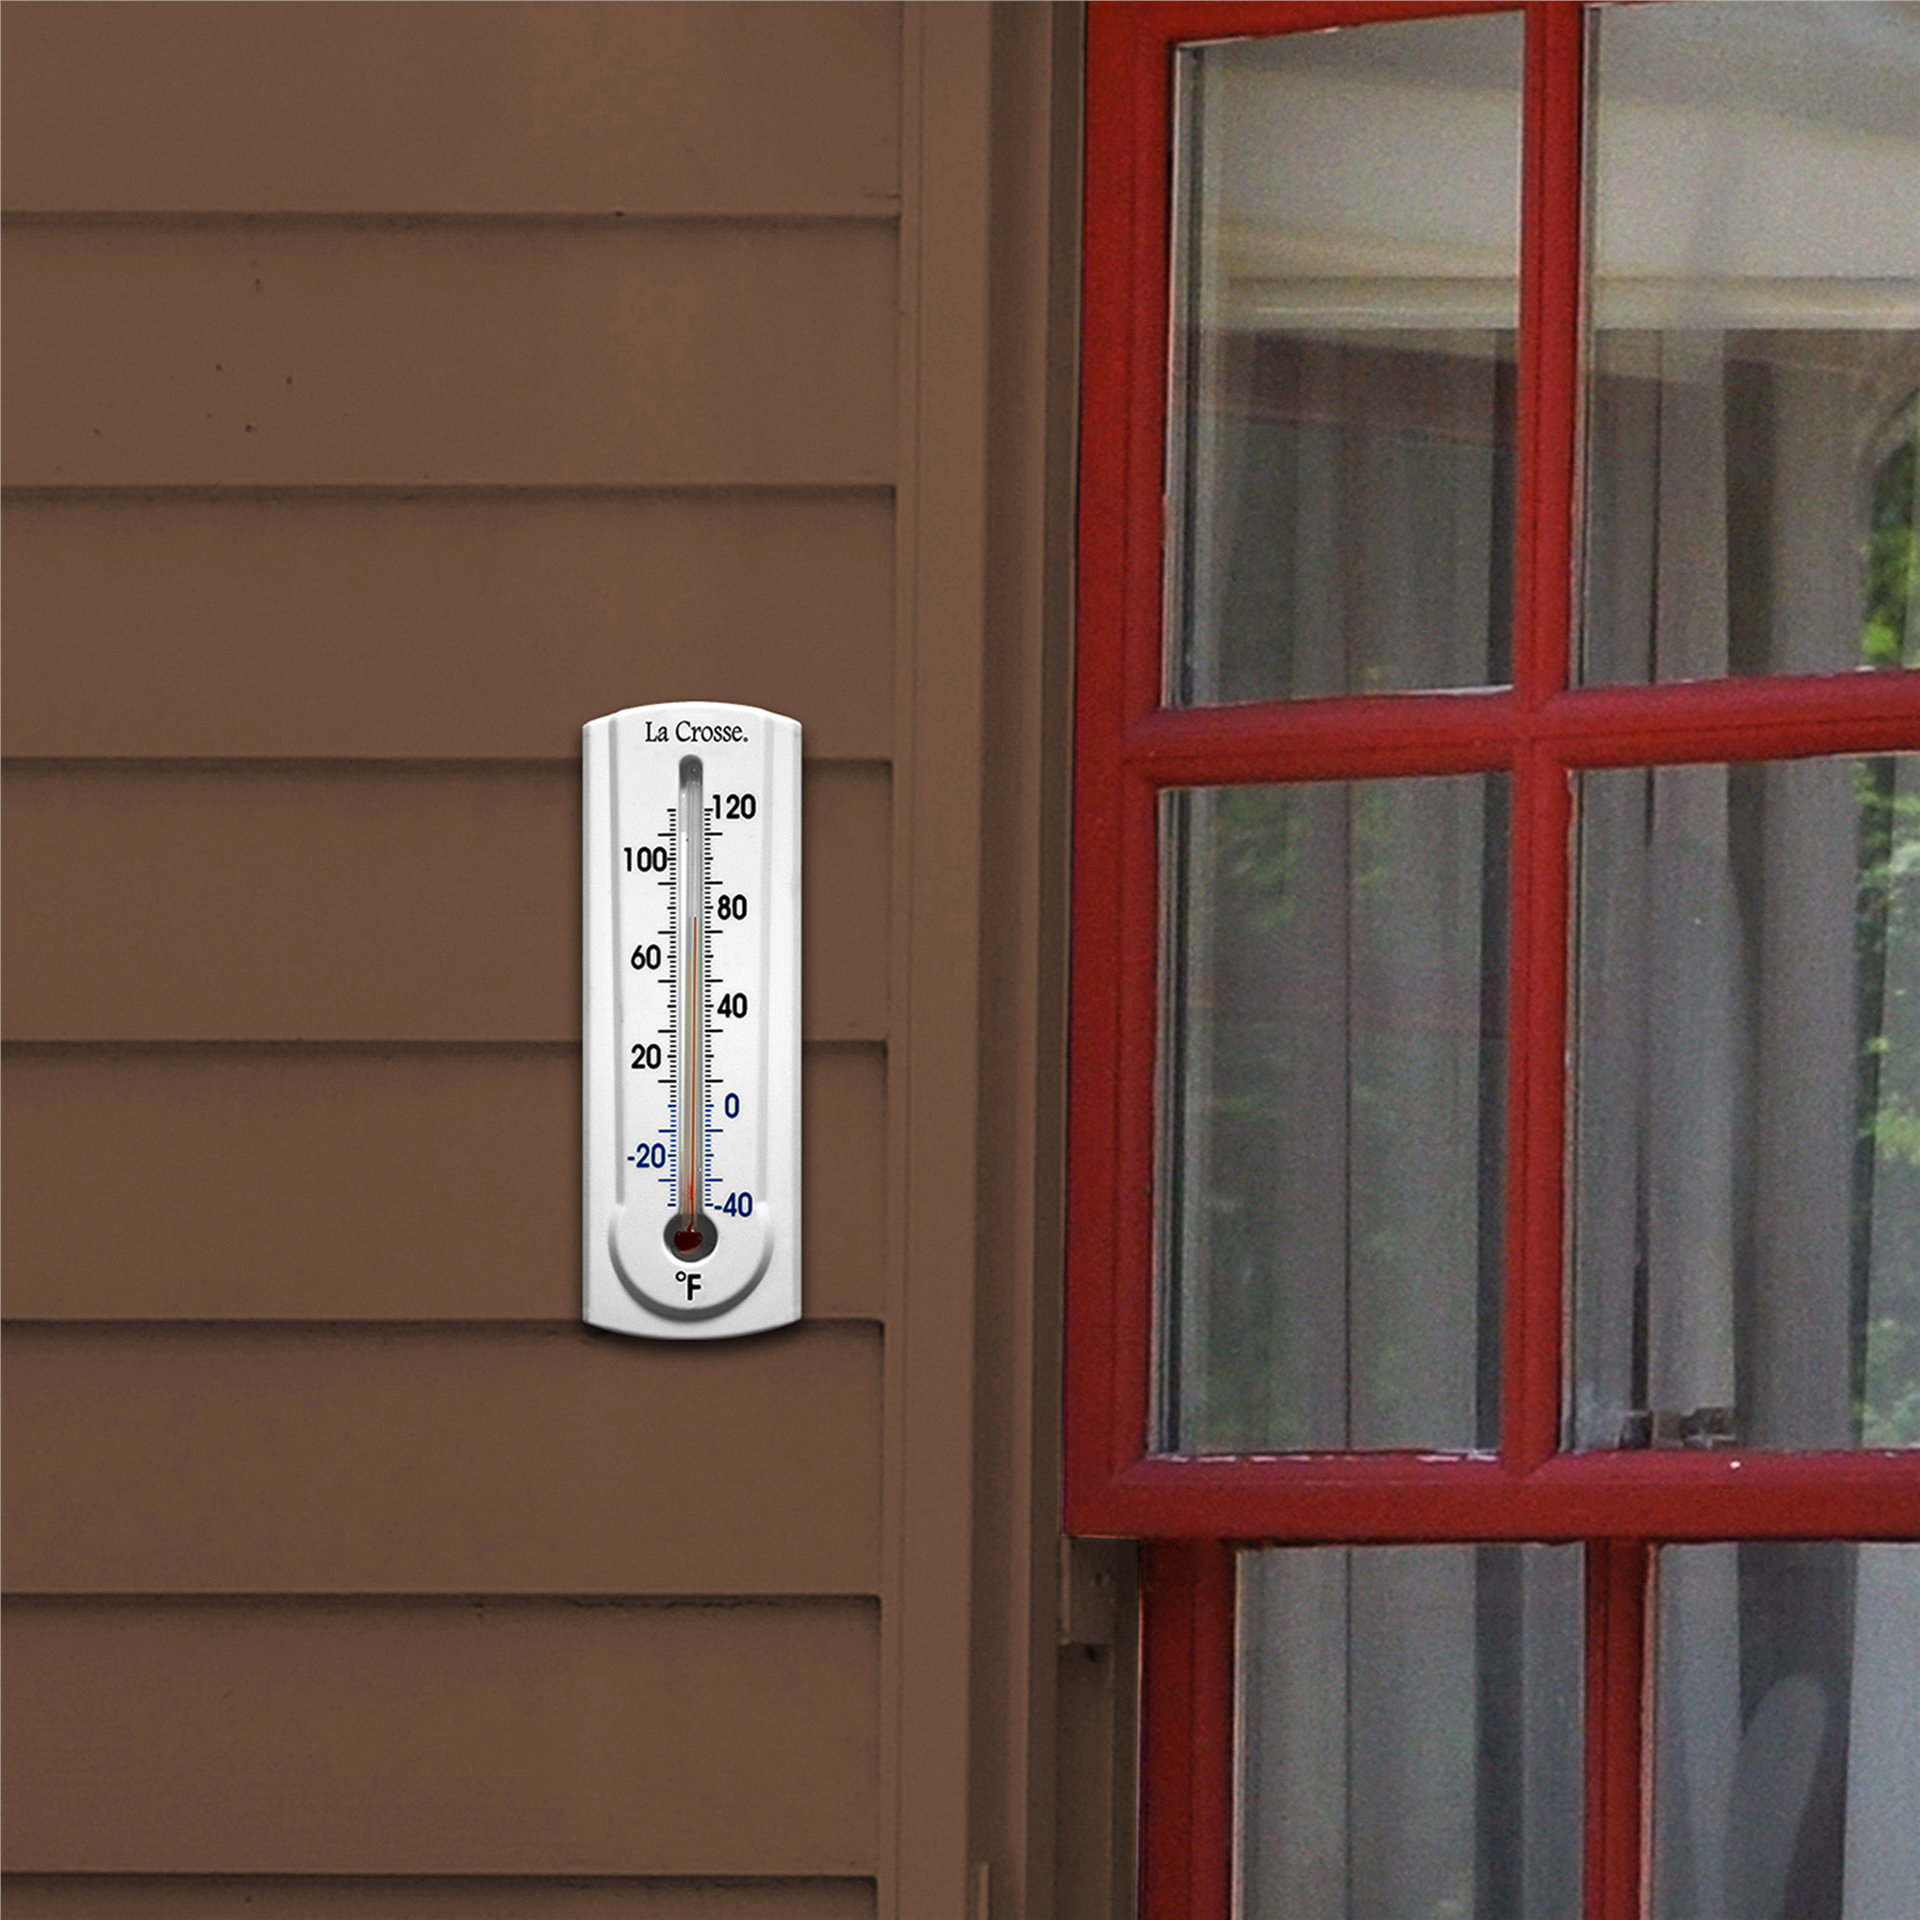 slide 5 of 5, La Crosse 6.5" Traditional Thermometer with Key Holder - 204-107, 6.5 ft